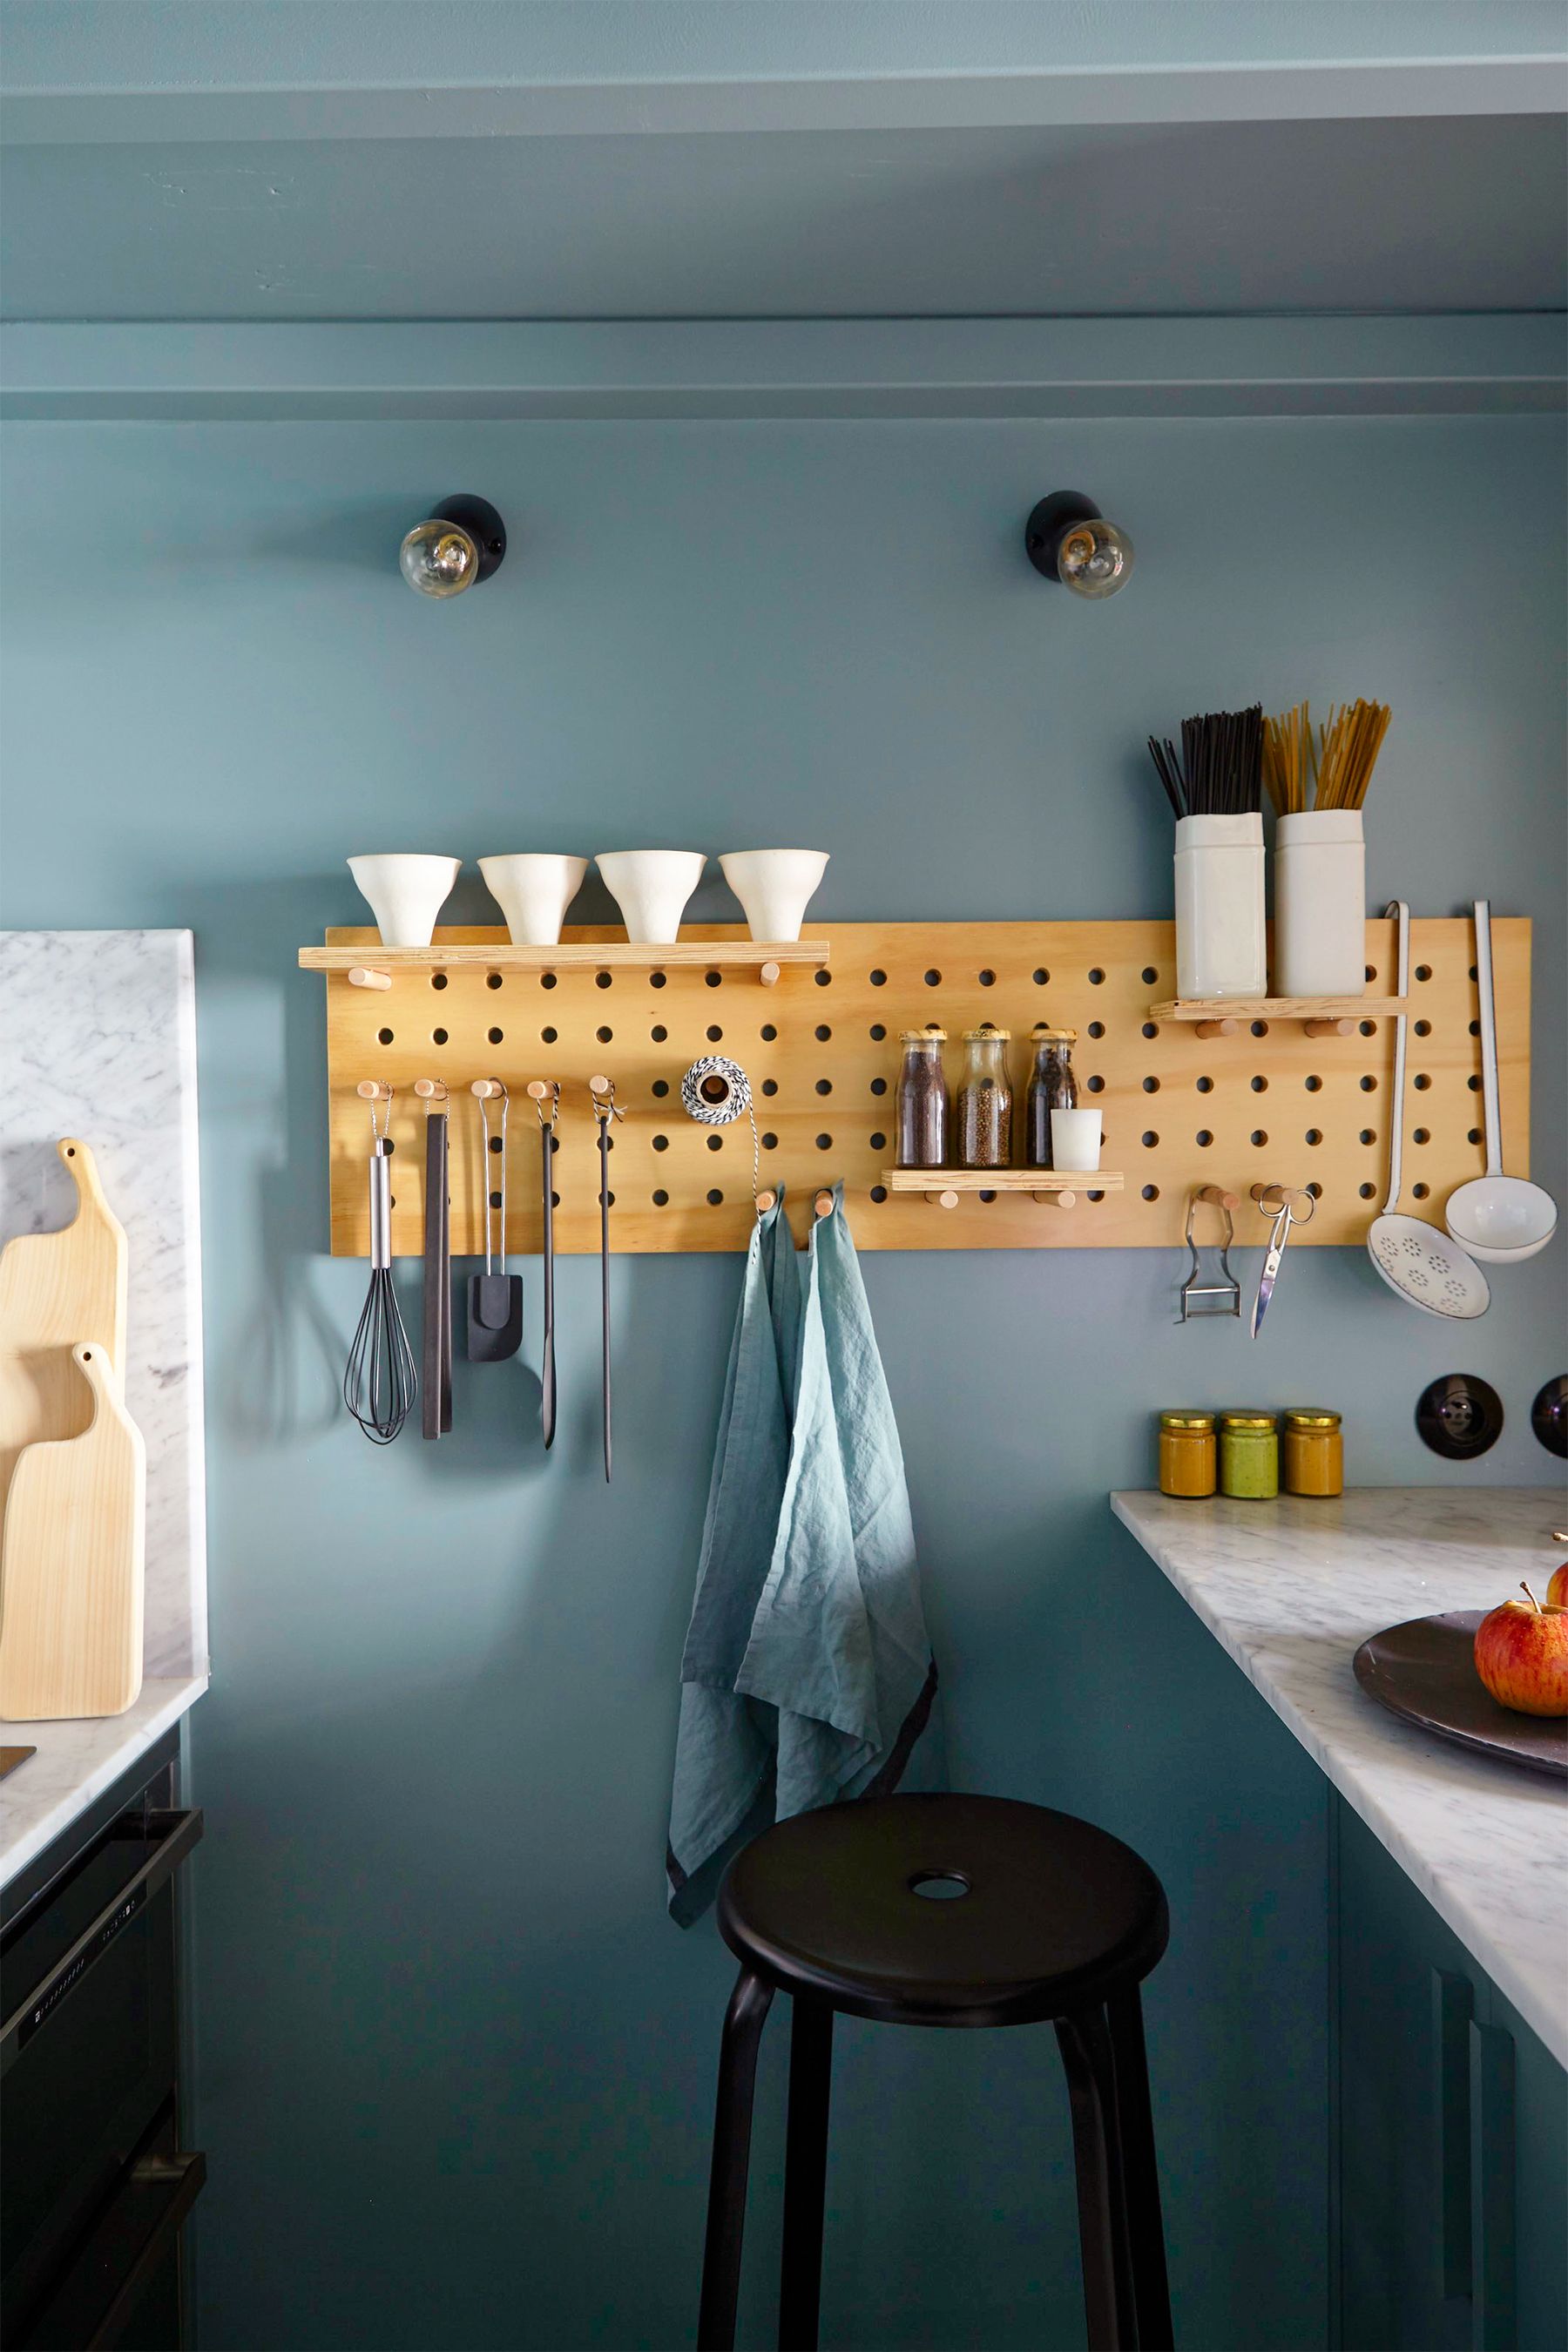 19 Wall Storage Ideas So There's Room for Everything You Need